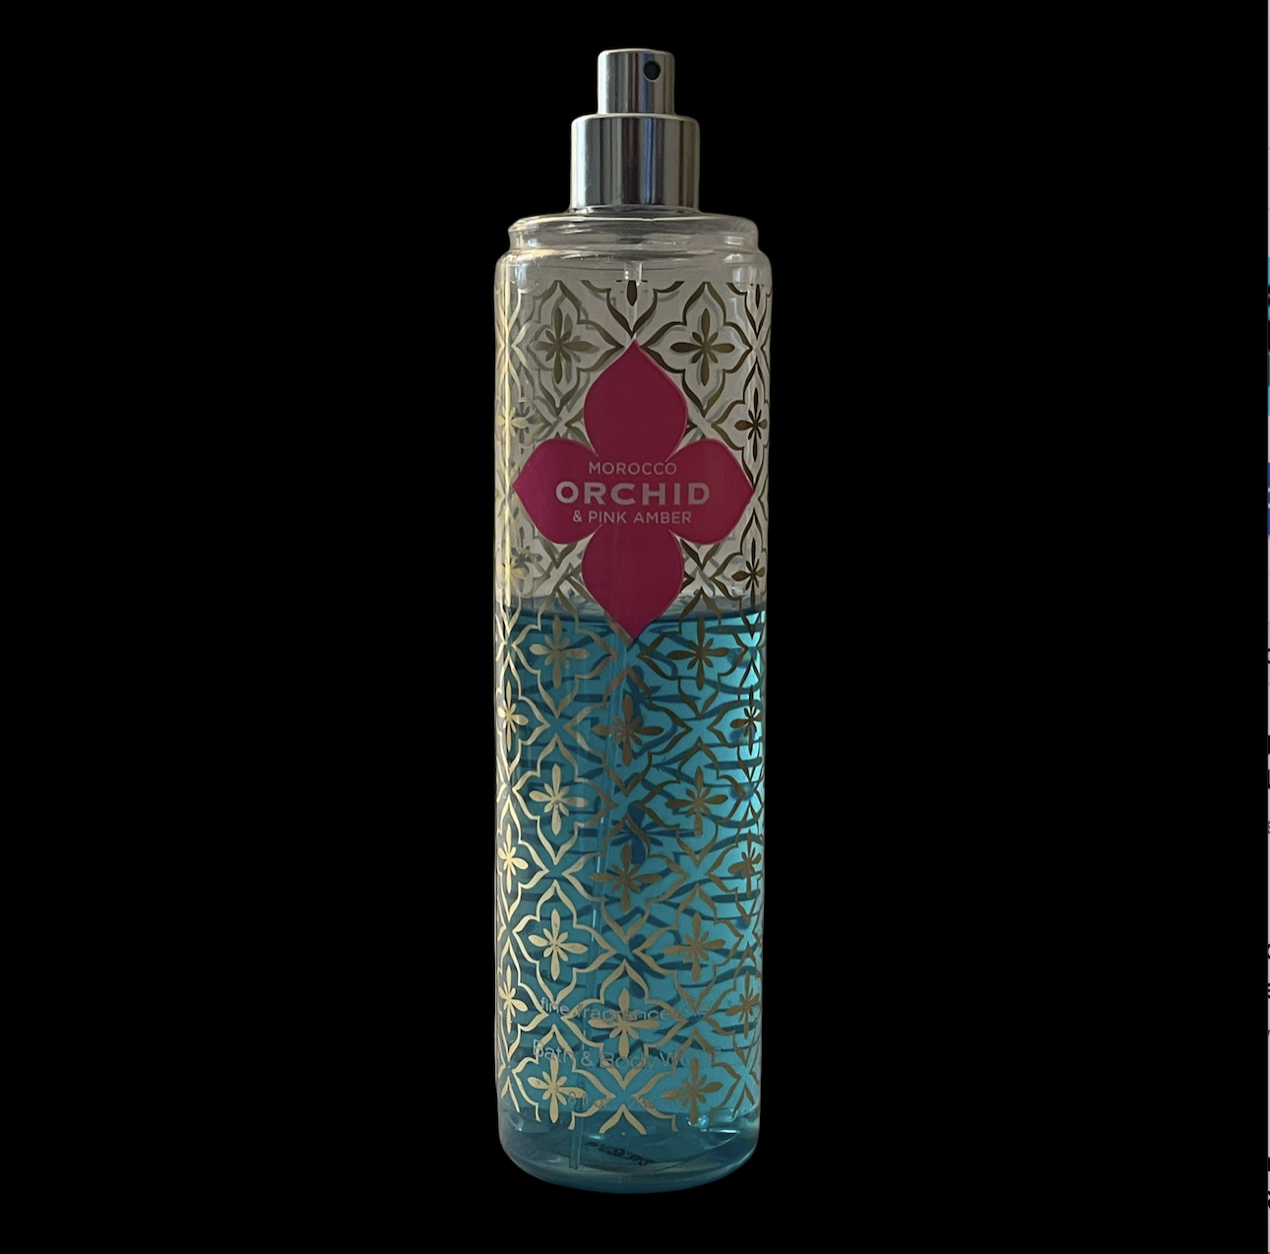 Primary image for BATH & BODY WORKS Fine Fragrance Mist MOROCCO ORCHID & PINK AMBER 60% + Full